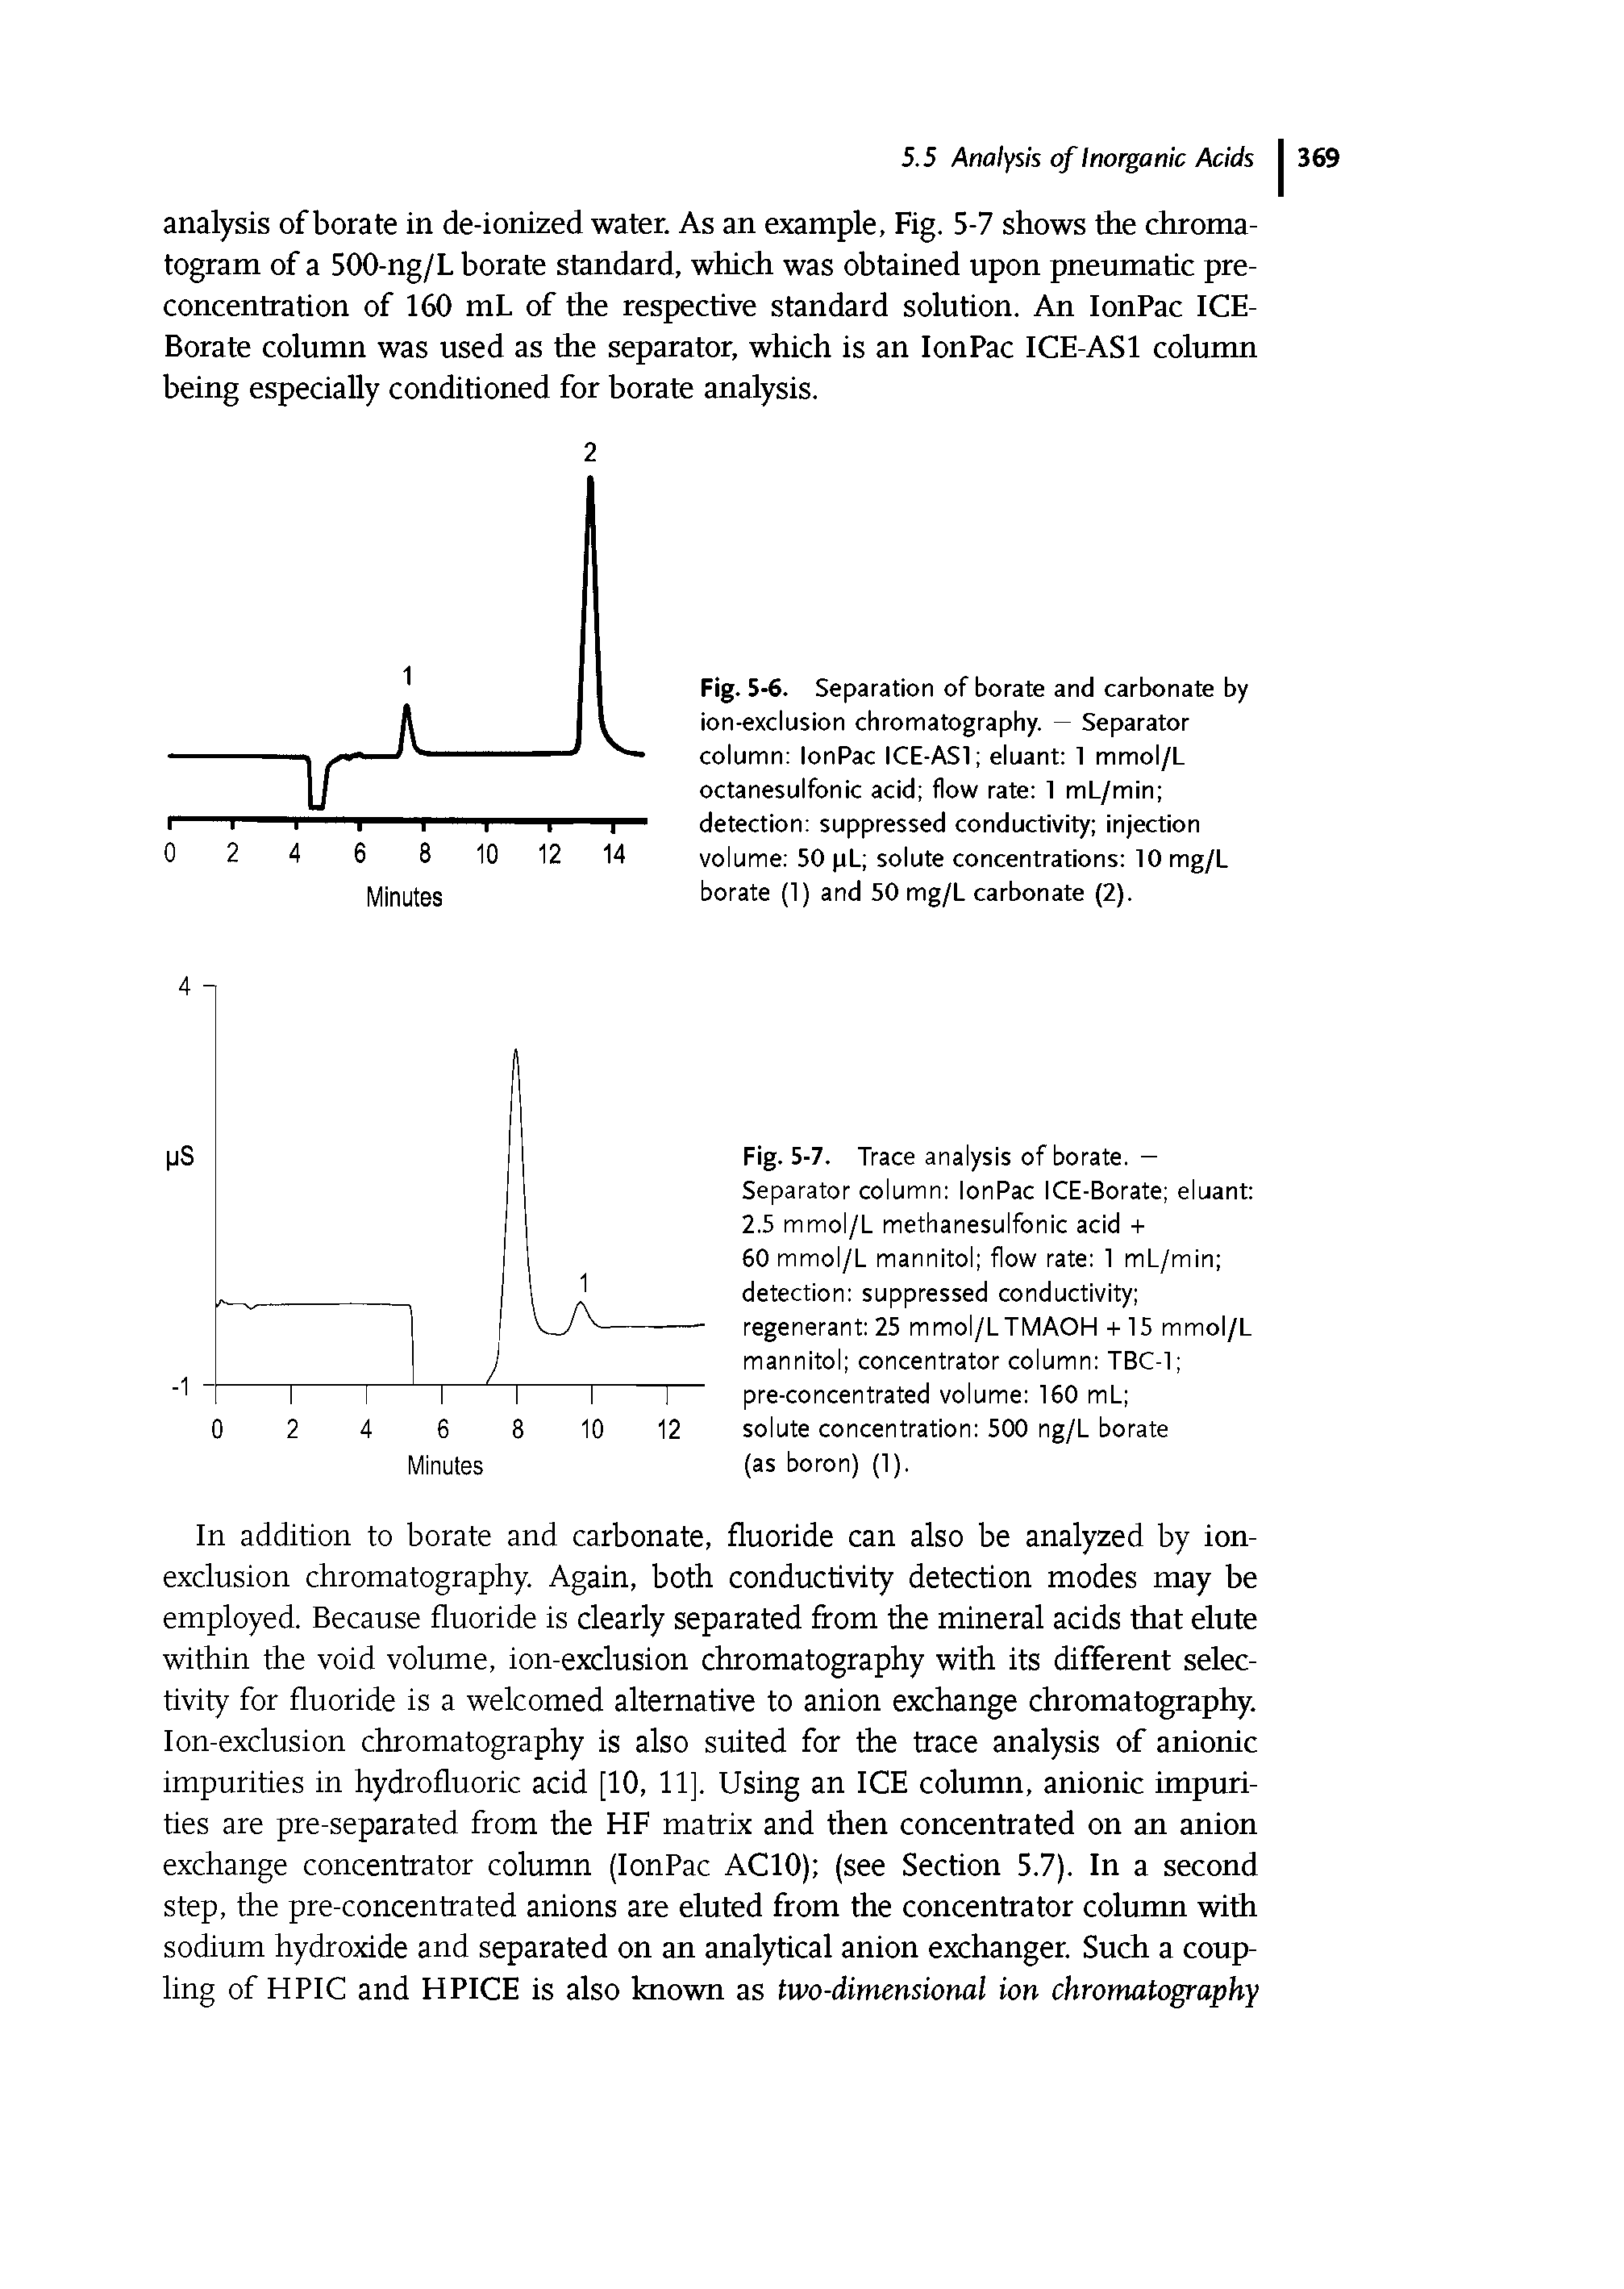 Fig. 5-6. Separation of borate and carbonate by ion-exclusion chromatography. — Separator column lonPac ICE-ASl eluant 1 mmol/L octanesulfonic acid flow rate 1 mL/min detection suppressed conductivity injection volume 50 pL solute concentrations 10 mg/L borate (1) and 50 mg/L carbonate (2).